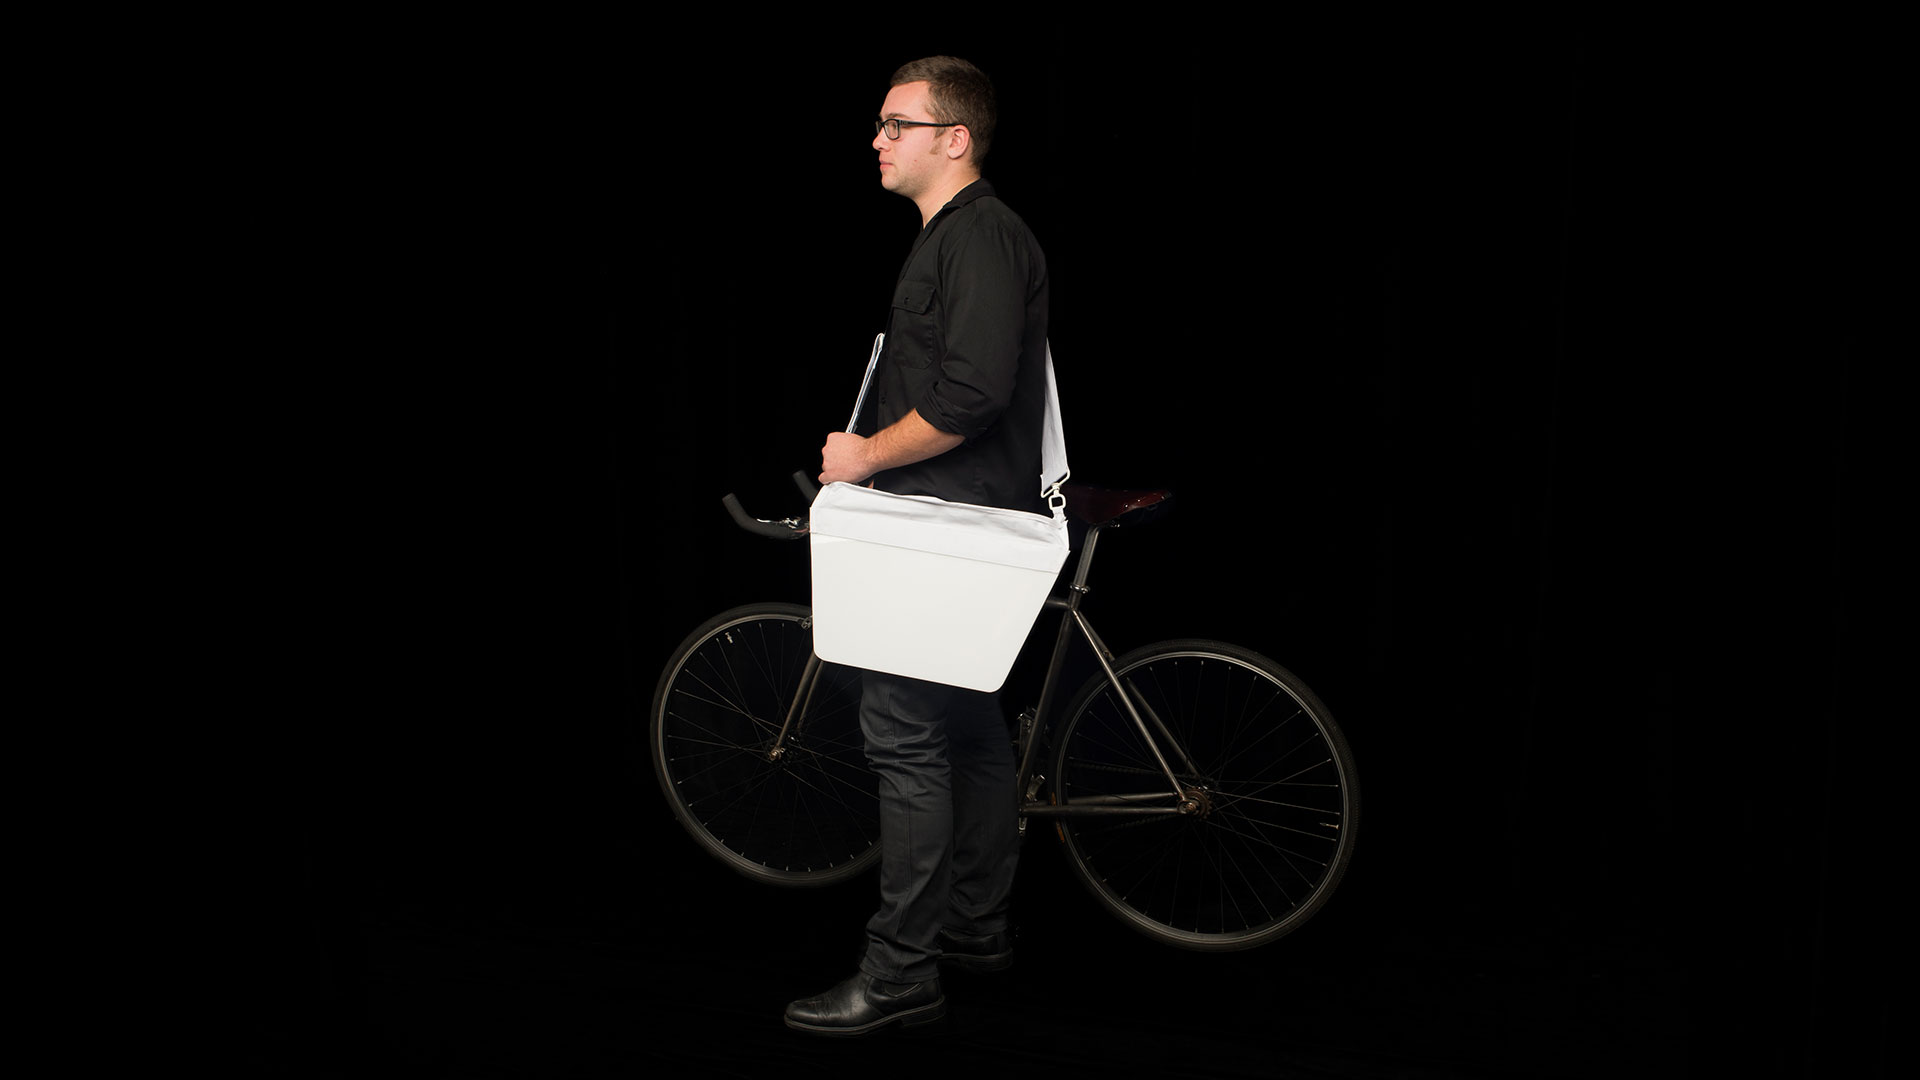 Student standing facing left with bike on his right side, a white messenger bag across his body with a tapered flap design